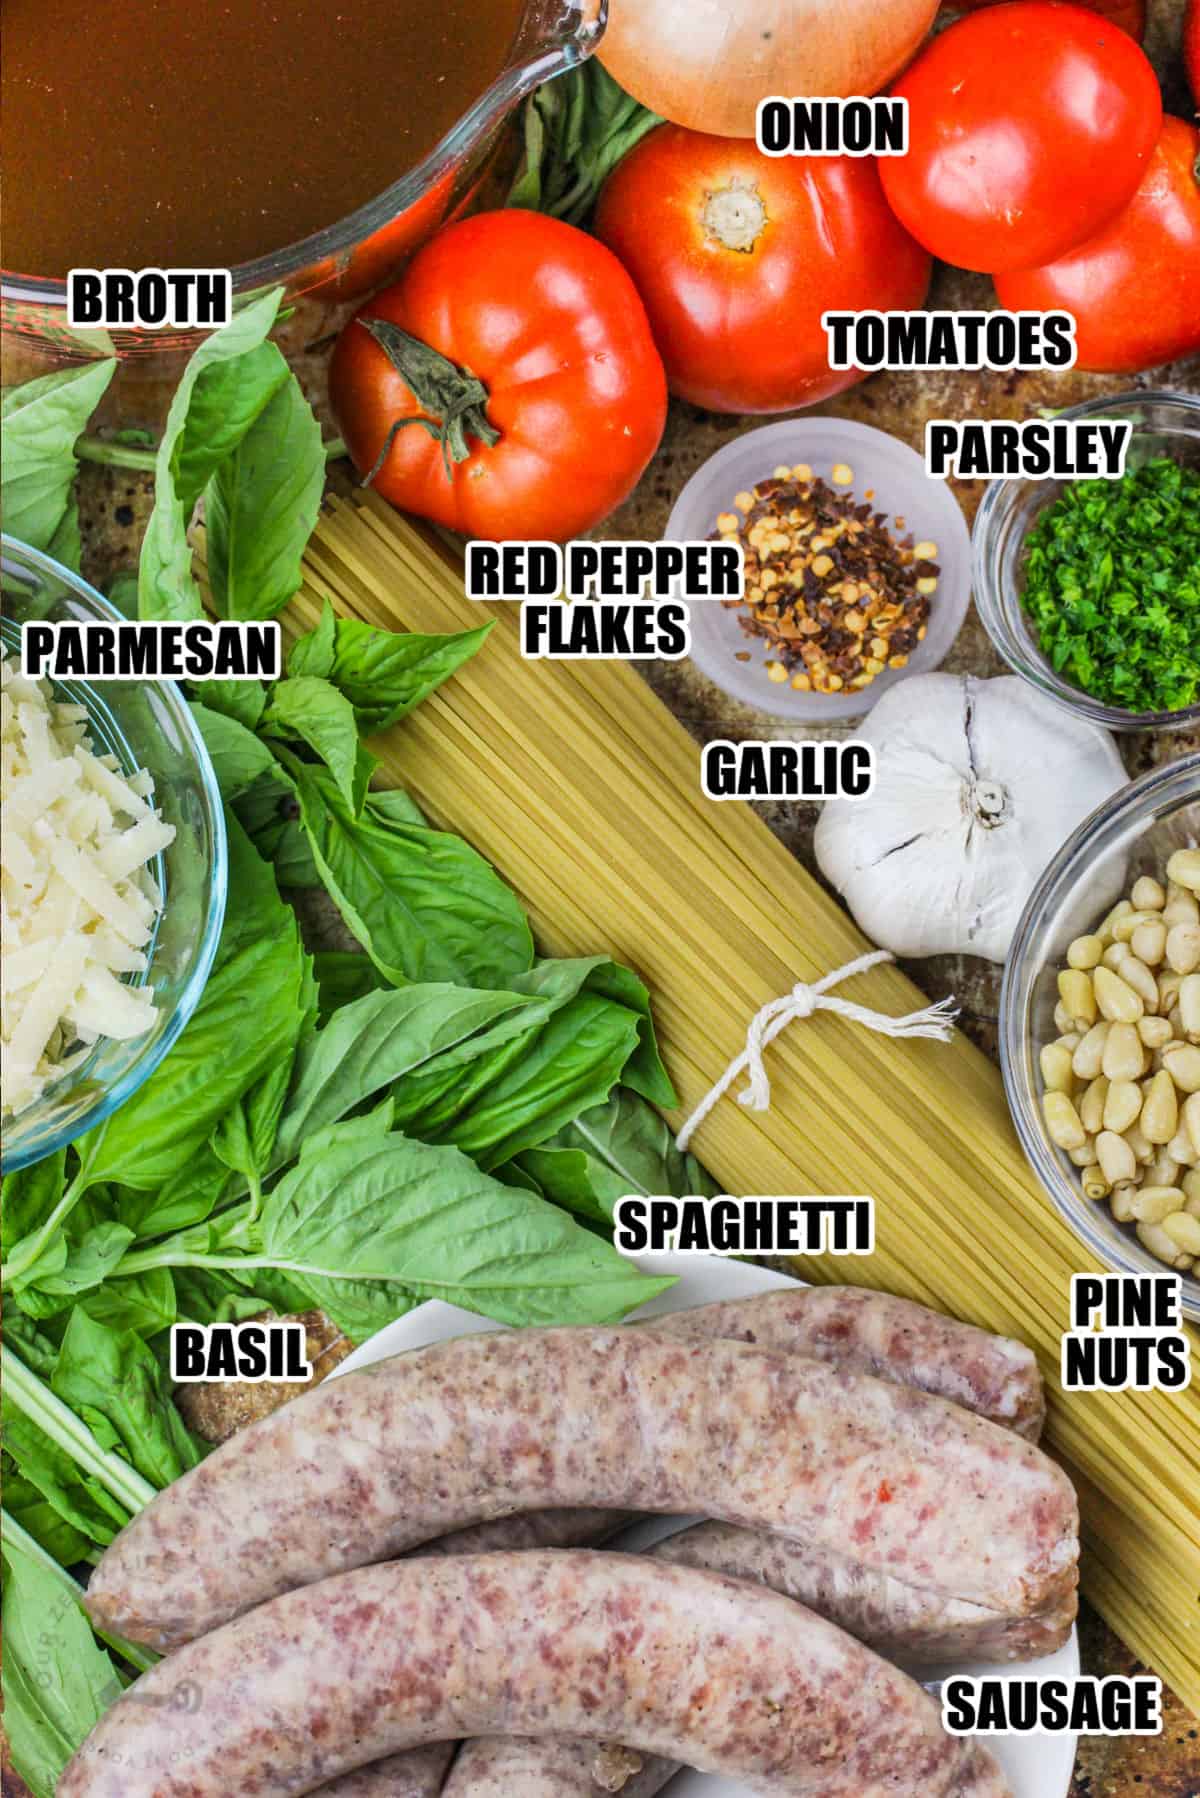 broth , onion , tomatoes , parsley , red pepper flakes , parmesan , garlic , pine nuts , spaghettit and sausage with labels to make Cheesy One Pot Pasta